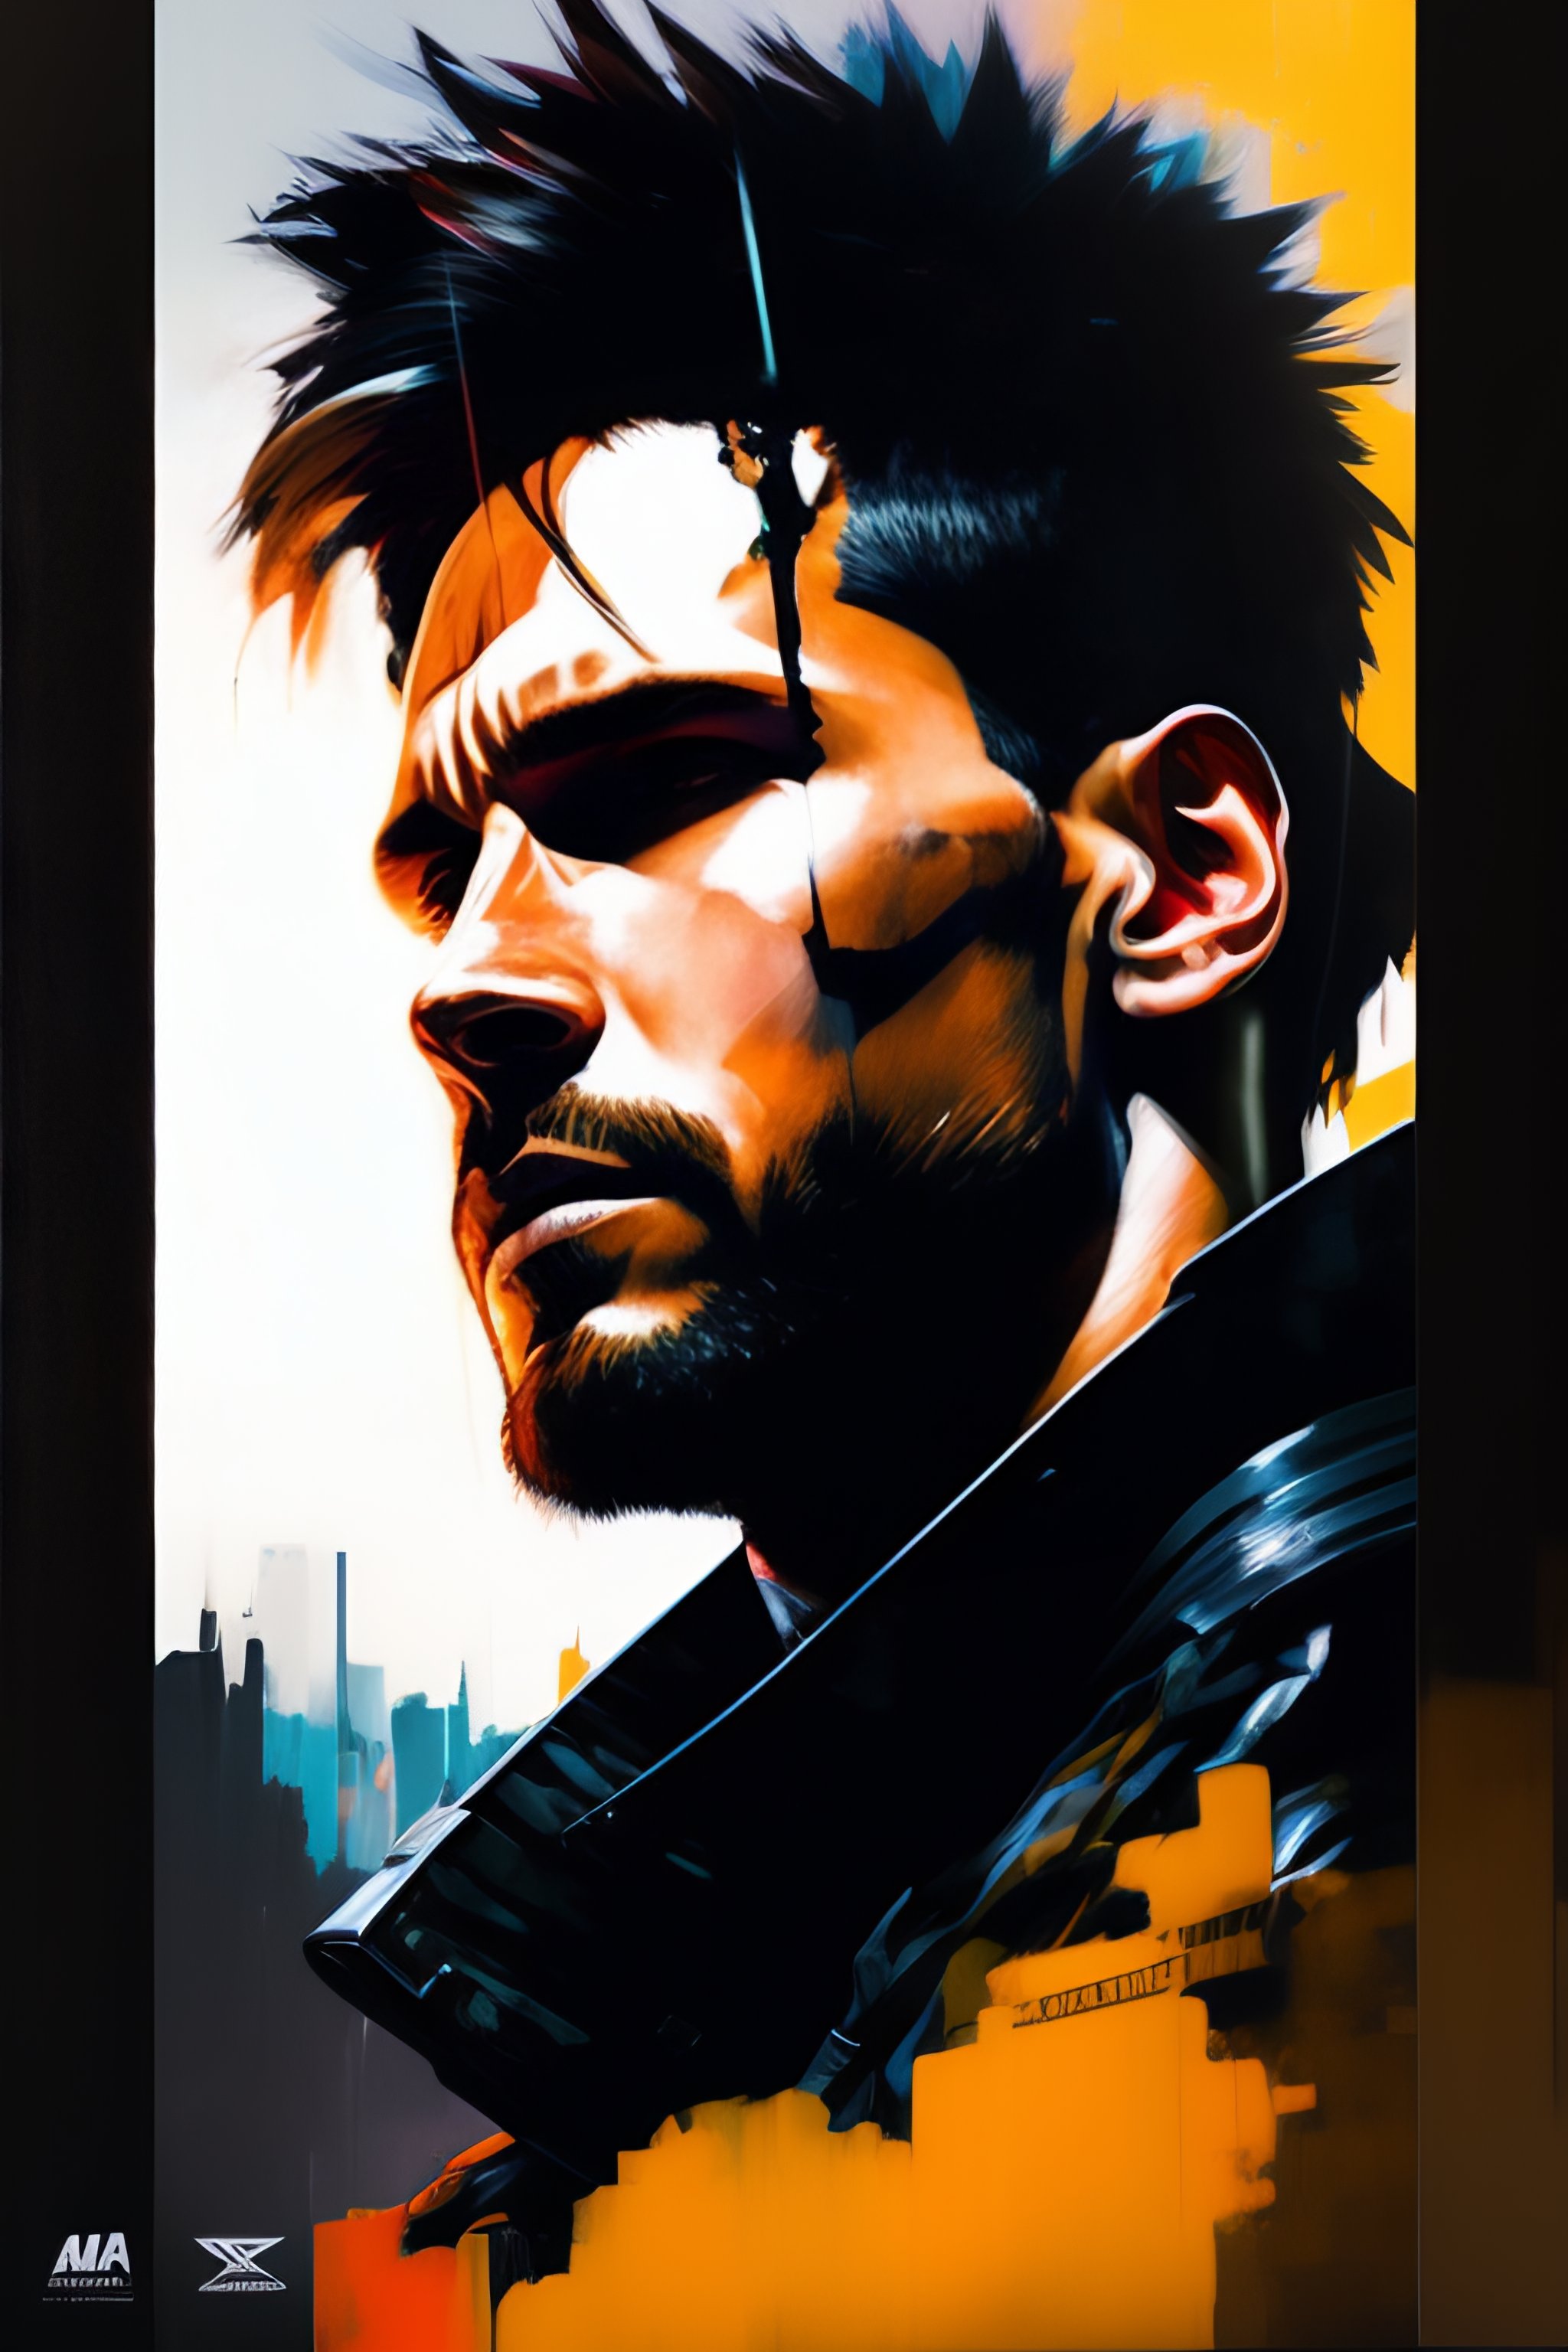 Lexica - Lionel messi wearing metal gear armor holding gun dramatic ...